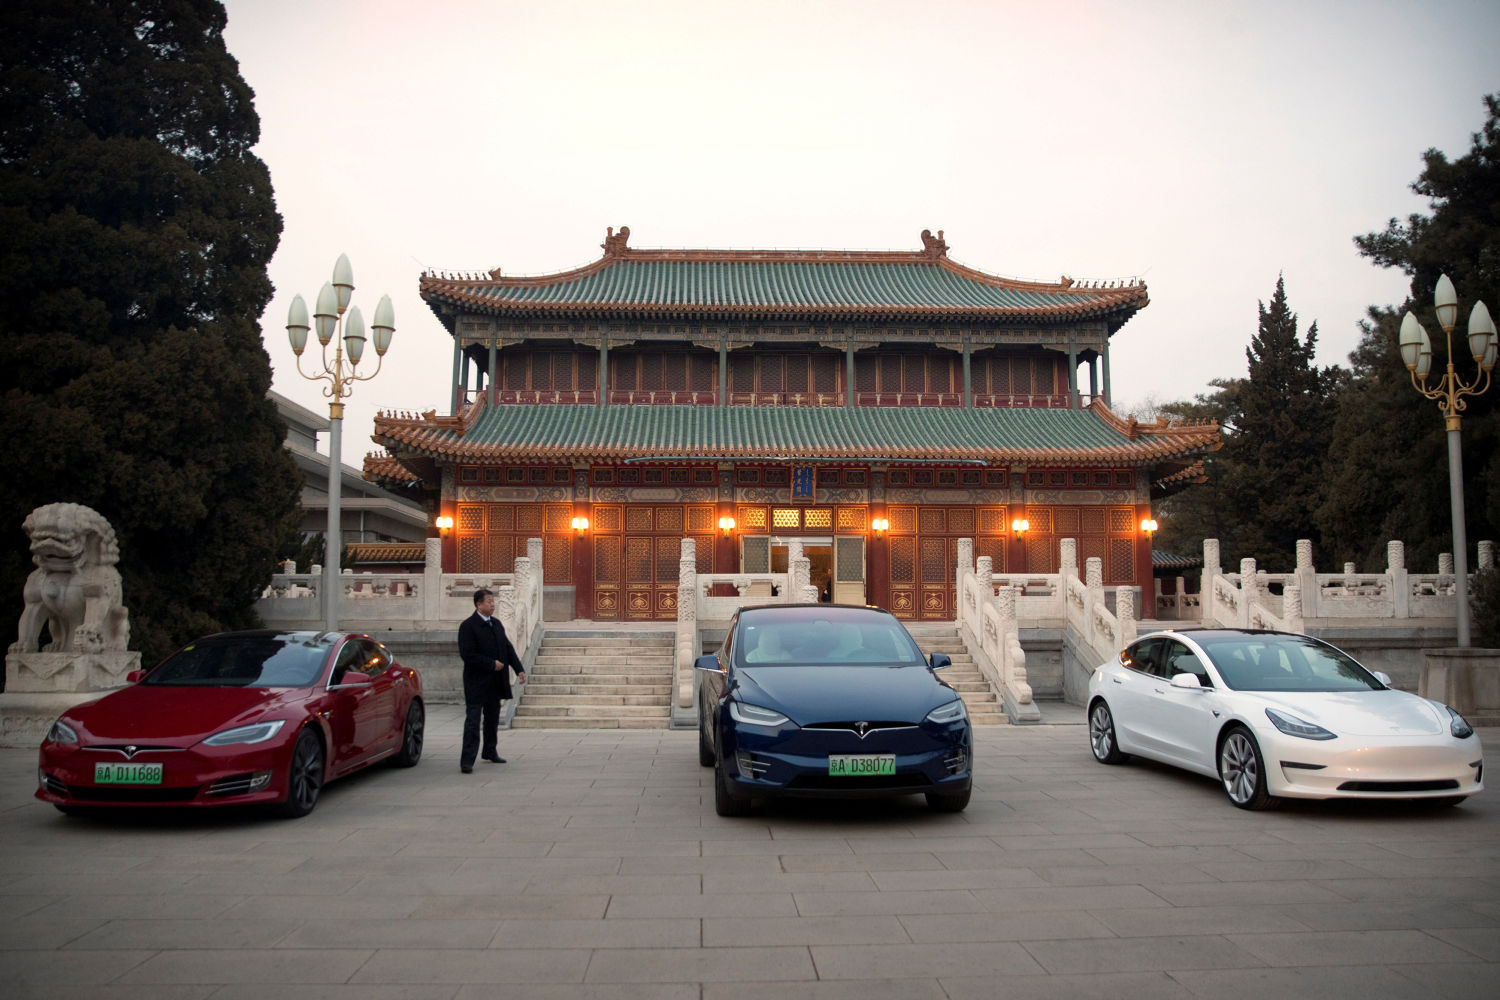 China steps up anti-Tesla activities, banning cars from Beidahei ahead of important party meeting and after Chengdu police kept them away from Xi during visit there.